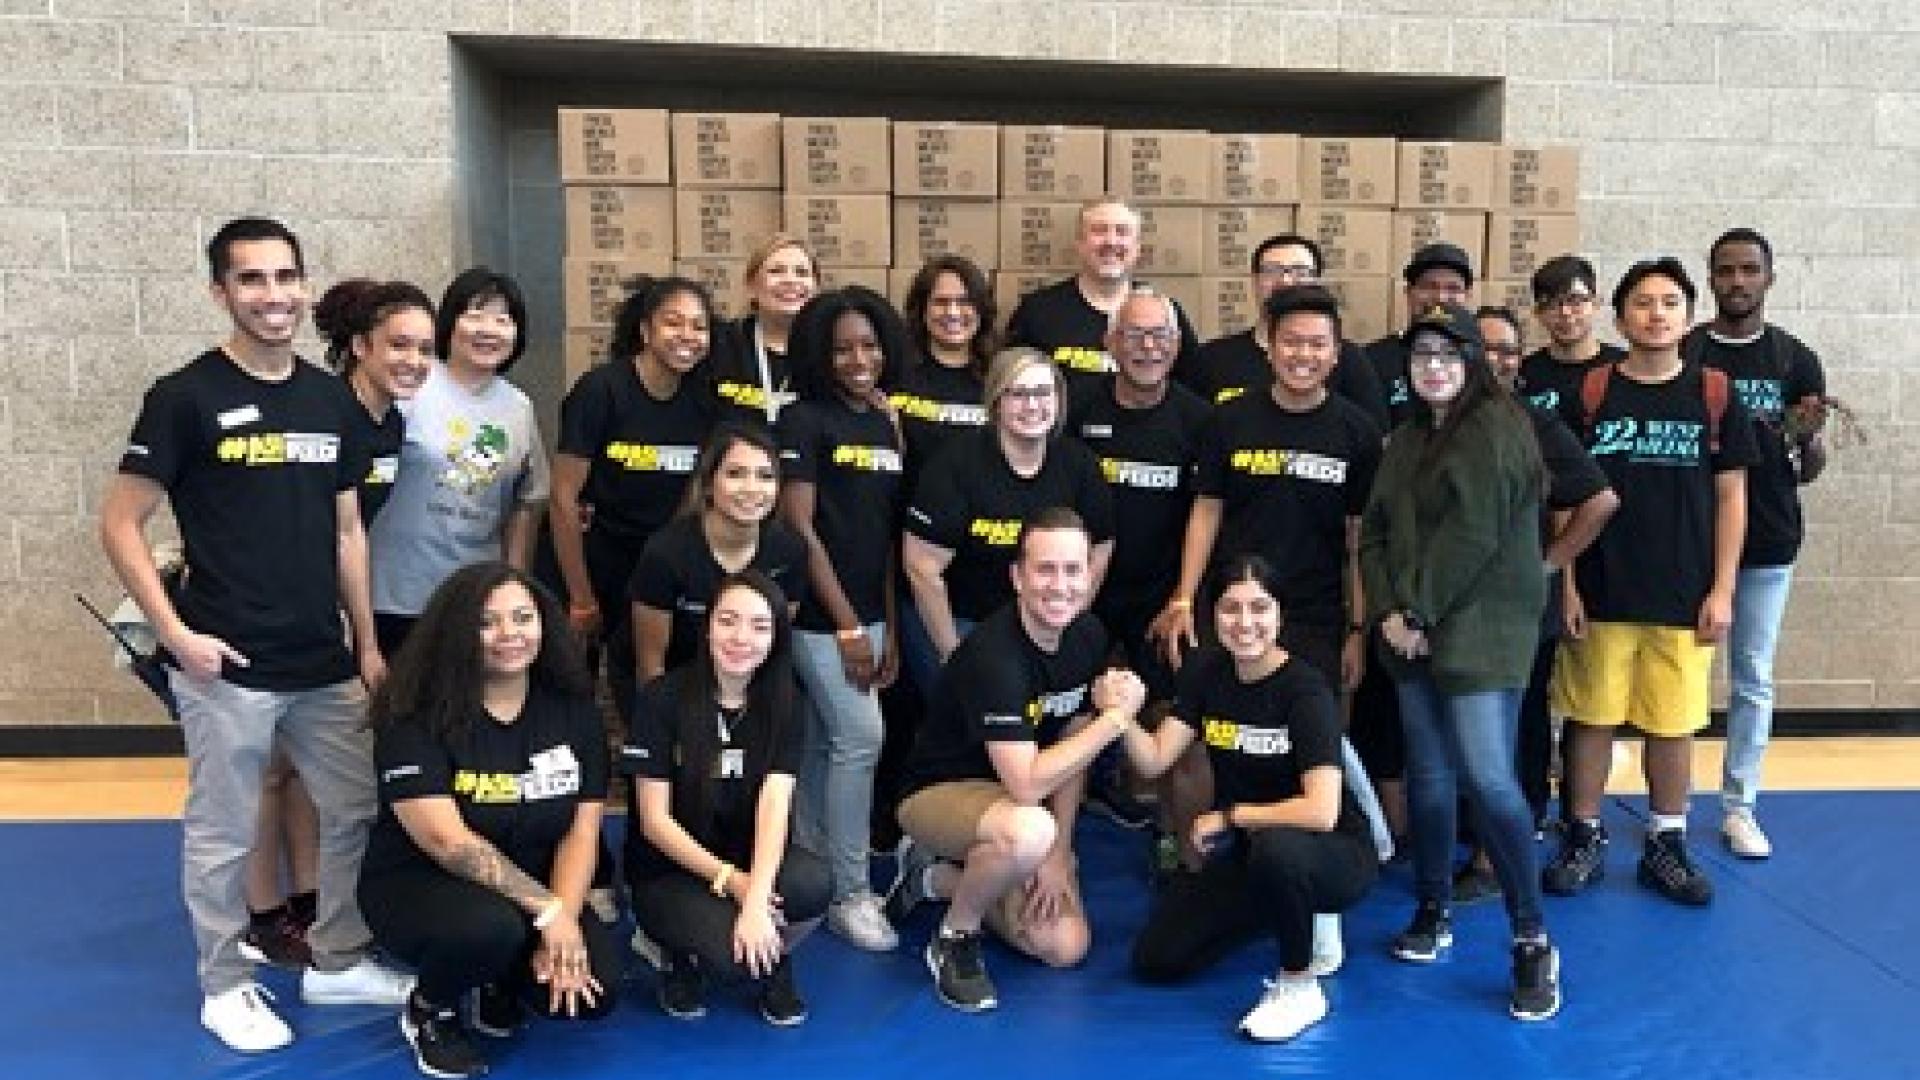 Packed 10,000 meals for students using the Beach Pantry and sister campuses Cal State Fullerton and Cal Poly Pomona within 2 hours!